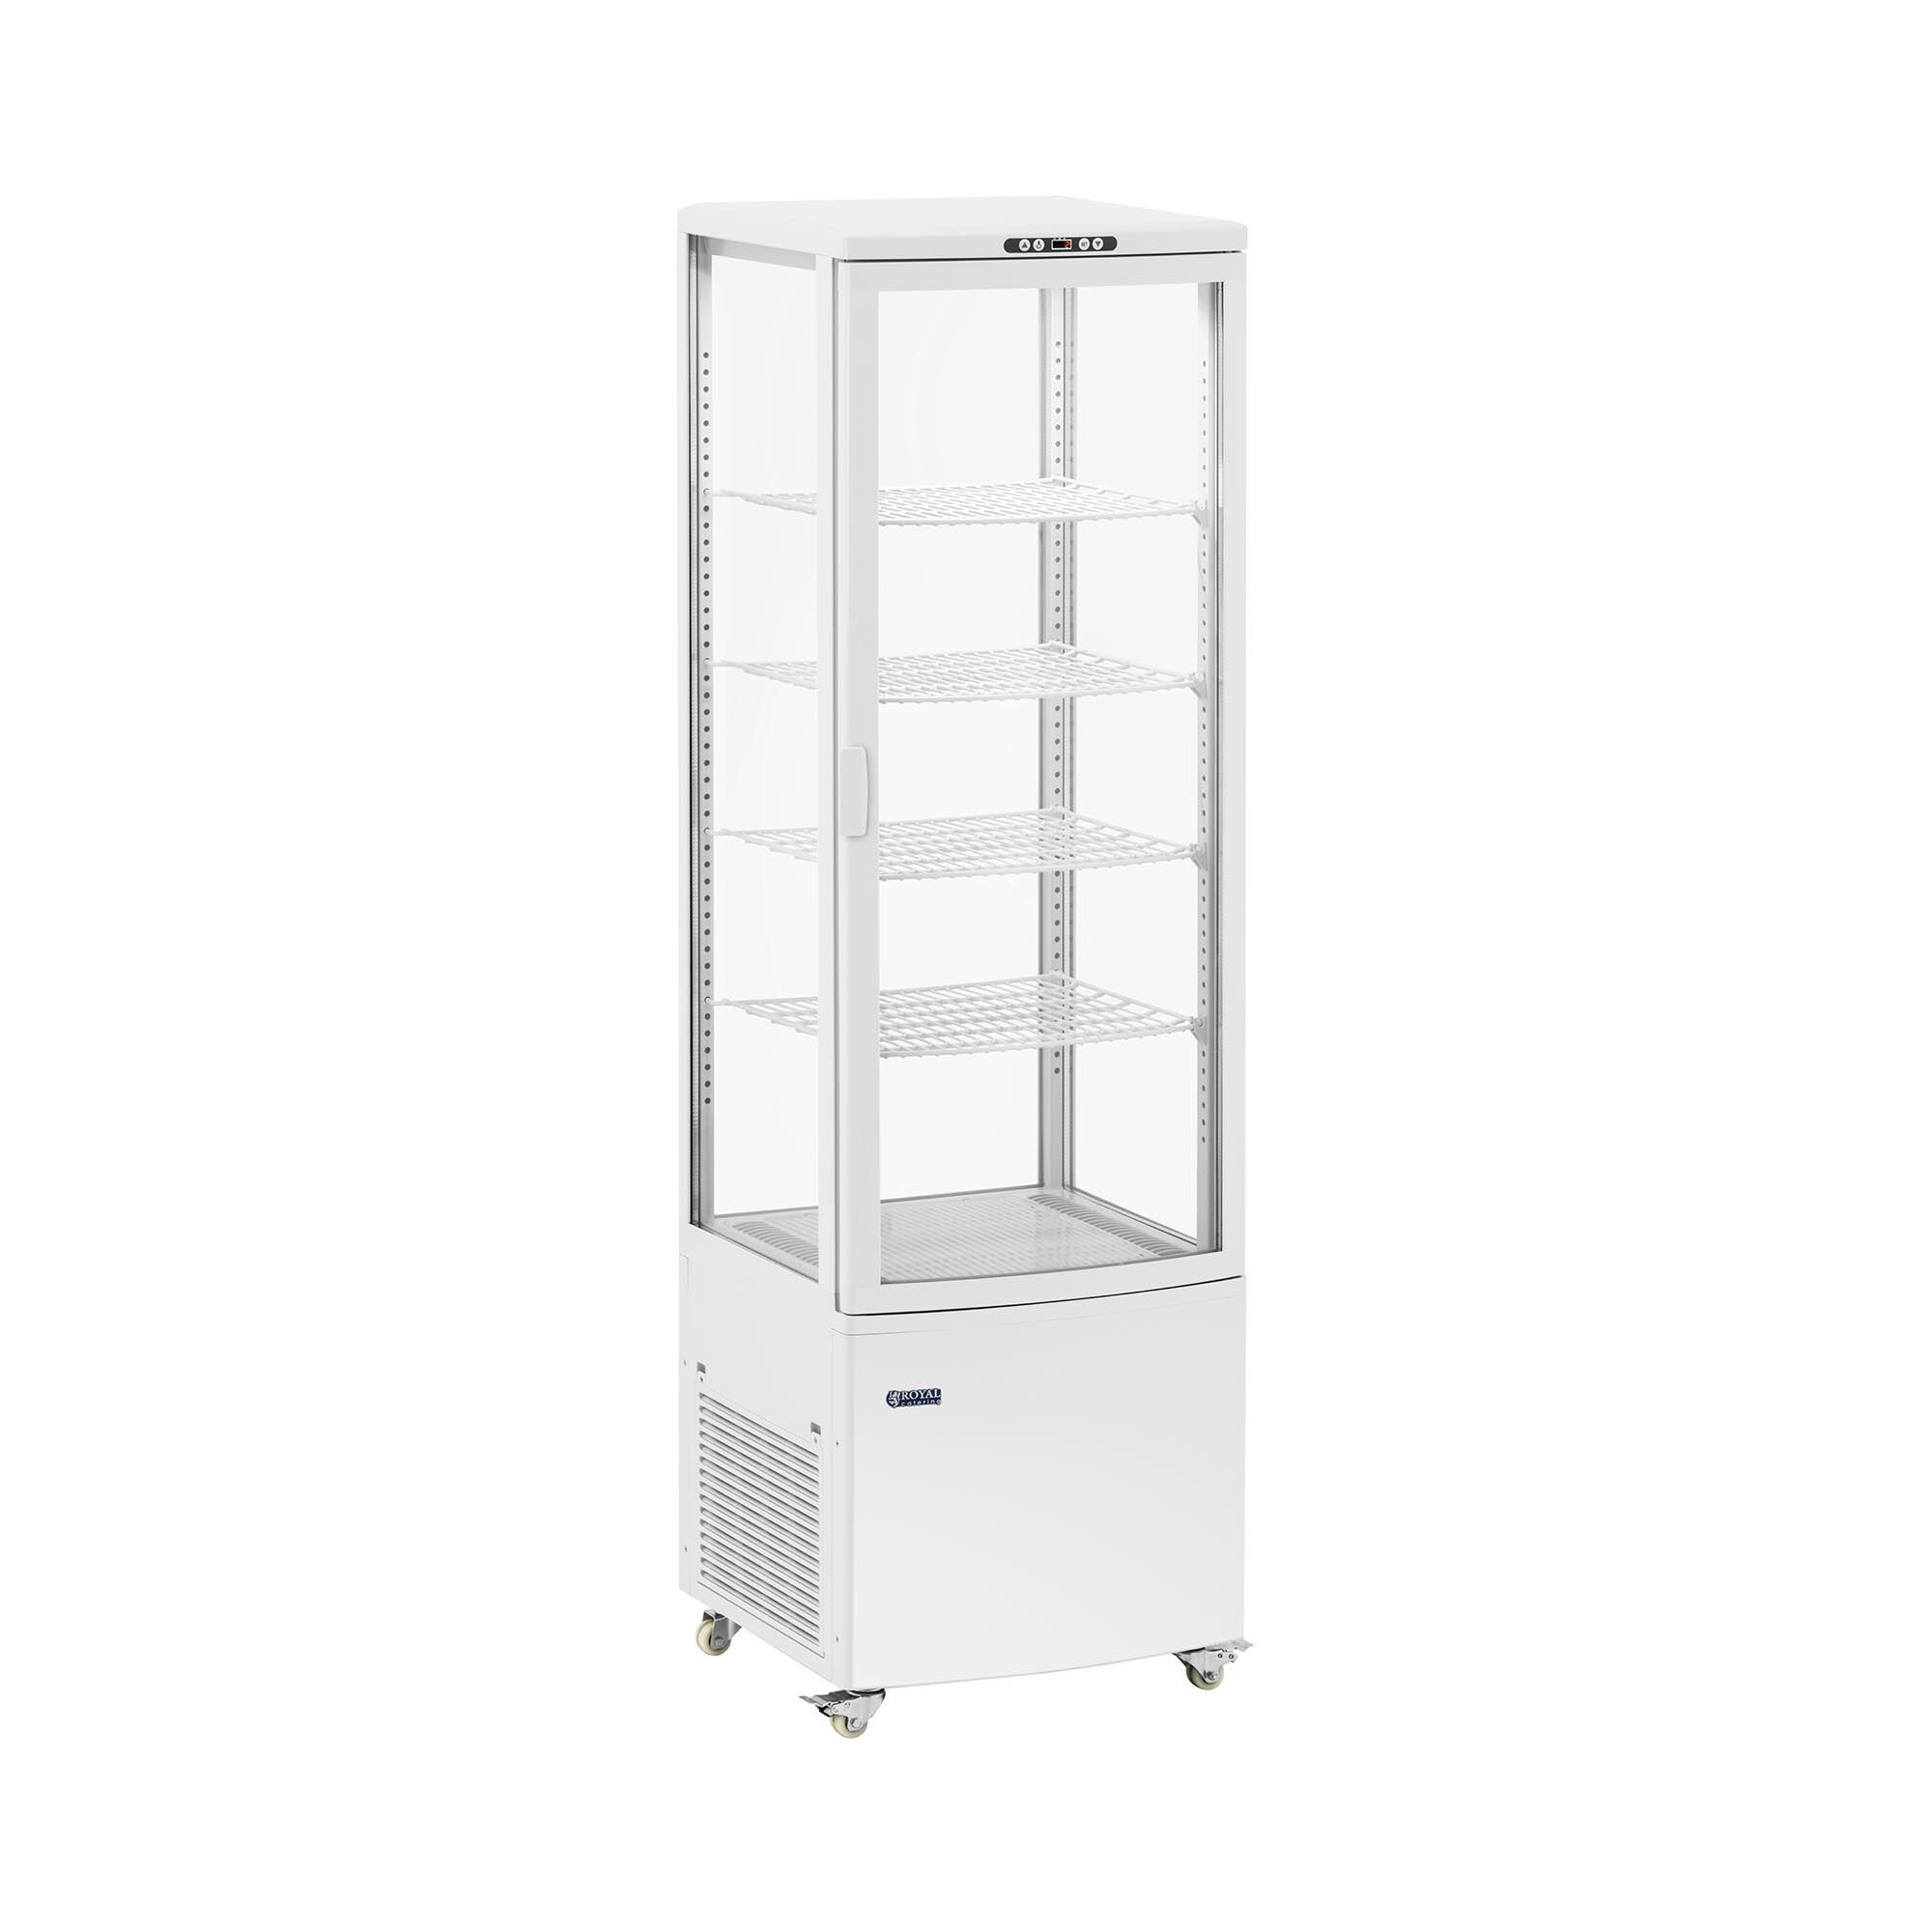 Royal Catering Refrigerated Display Case - 238 L - 5 levels - white - 4 wheels